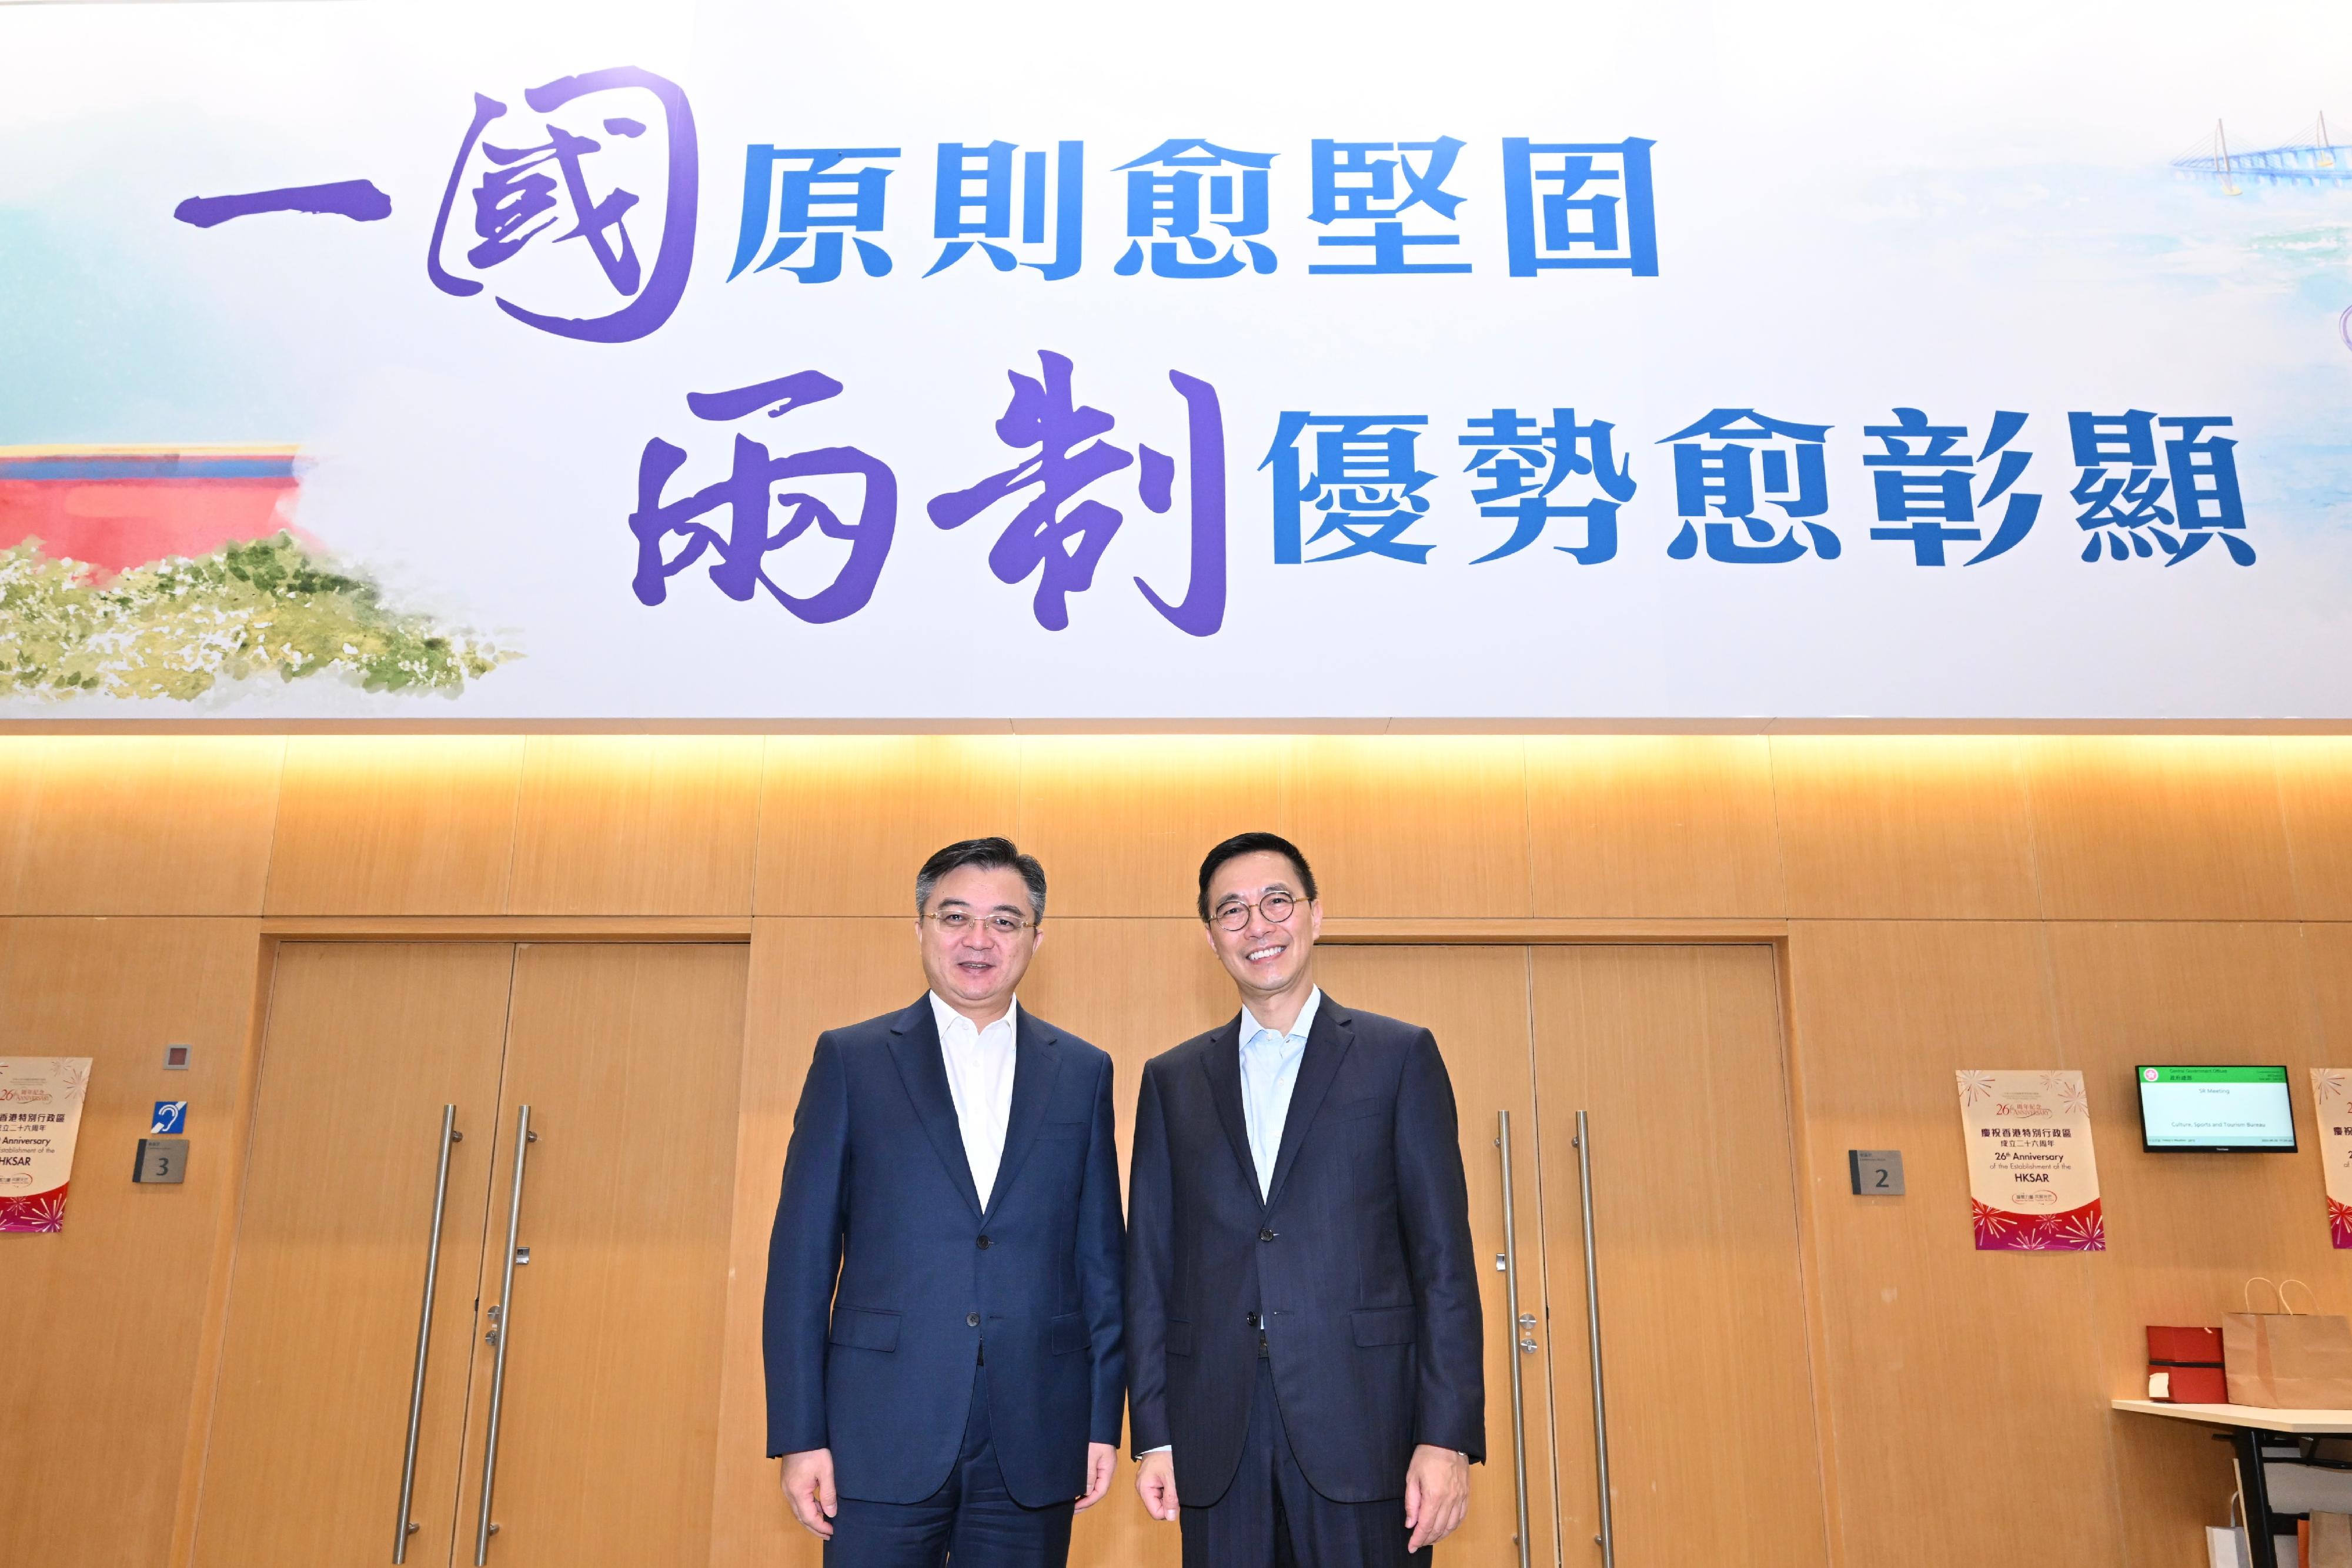 The Secretary for Culture, Sports and Tourism, Mr Kevin Yeung (right), today (June 30) met with the Head of the Sports Bureau of Guangdong Province, Mr Cui Jian (left).